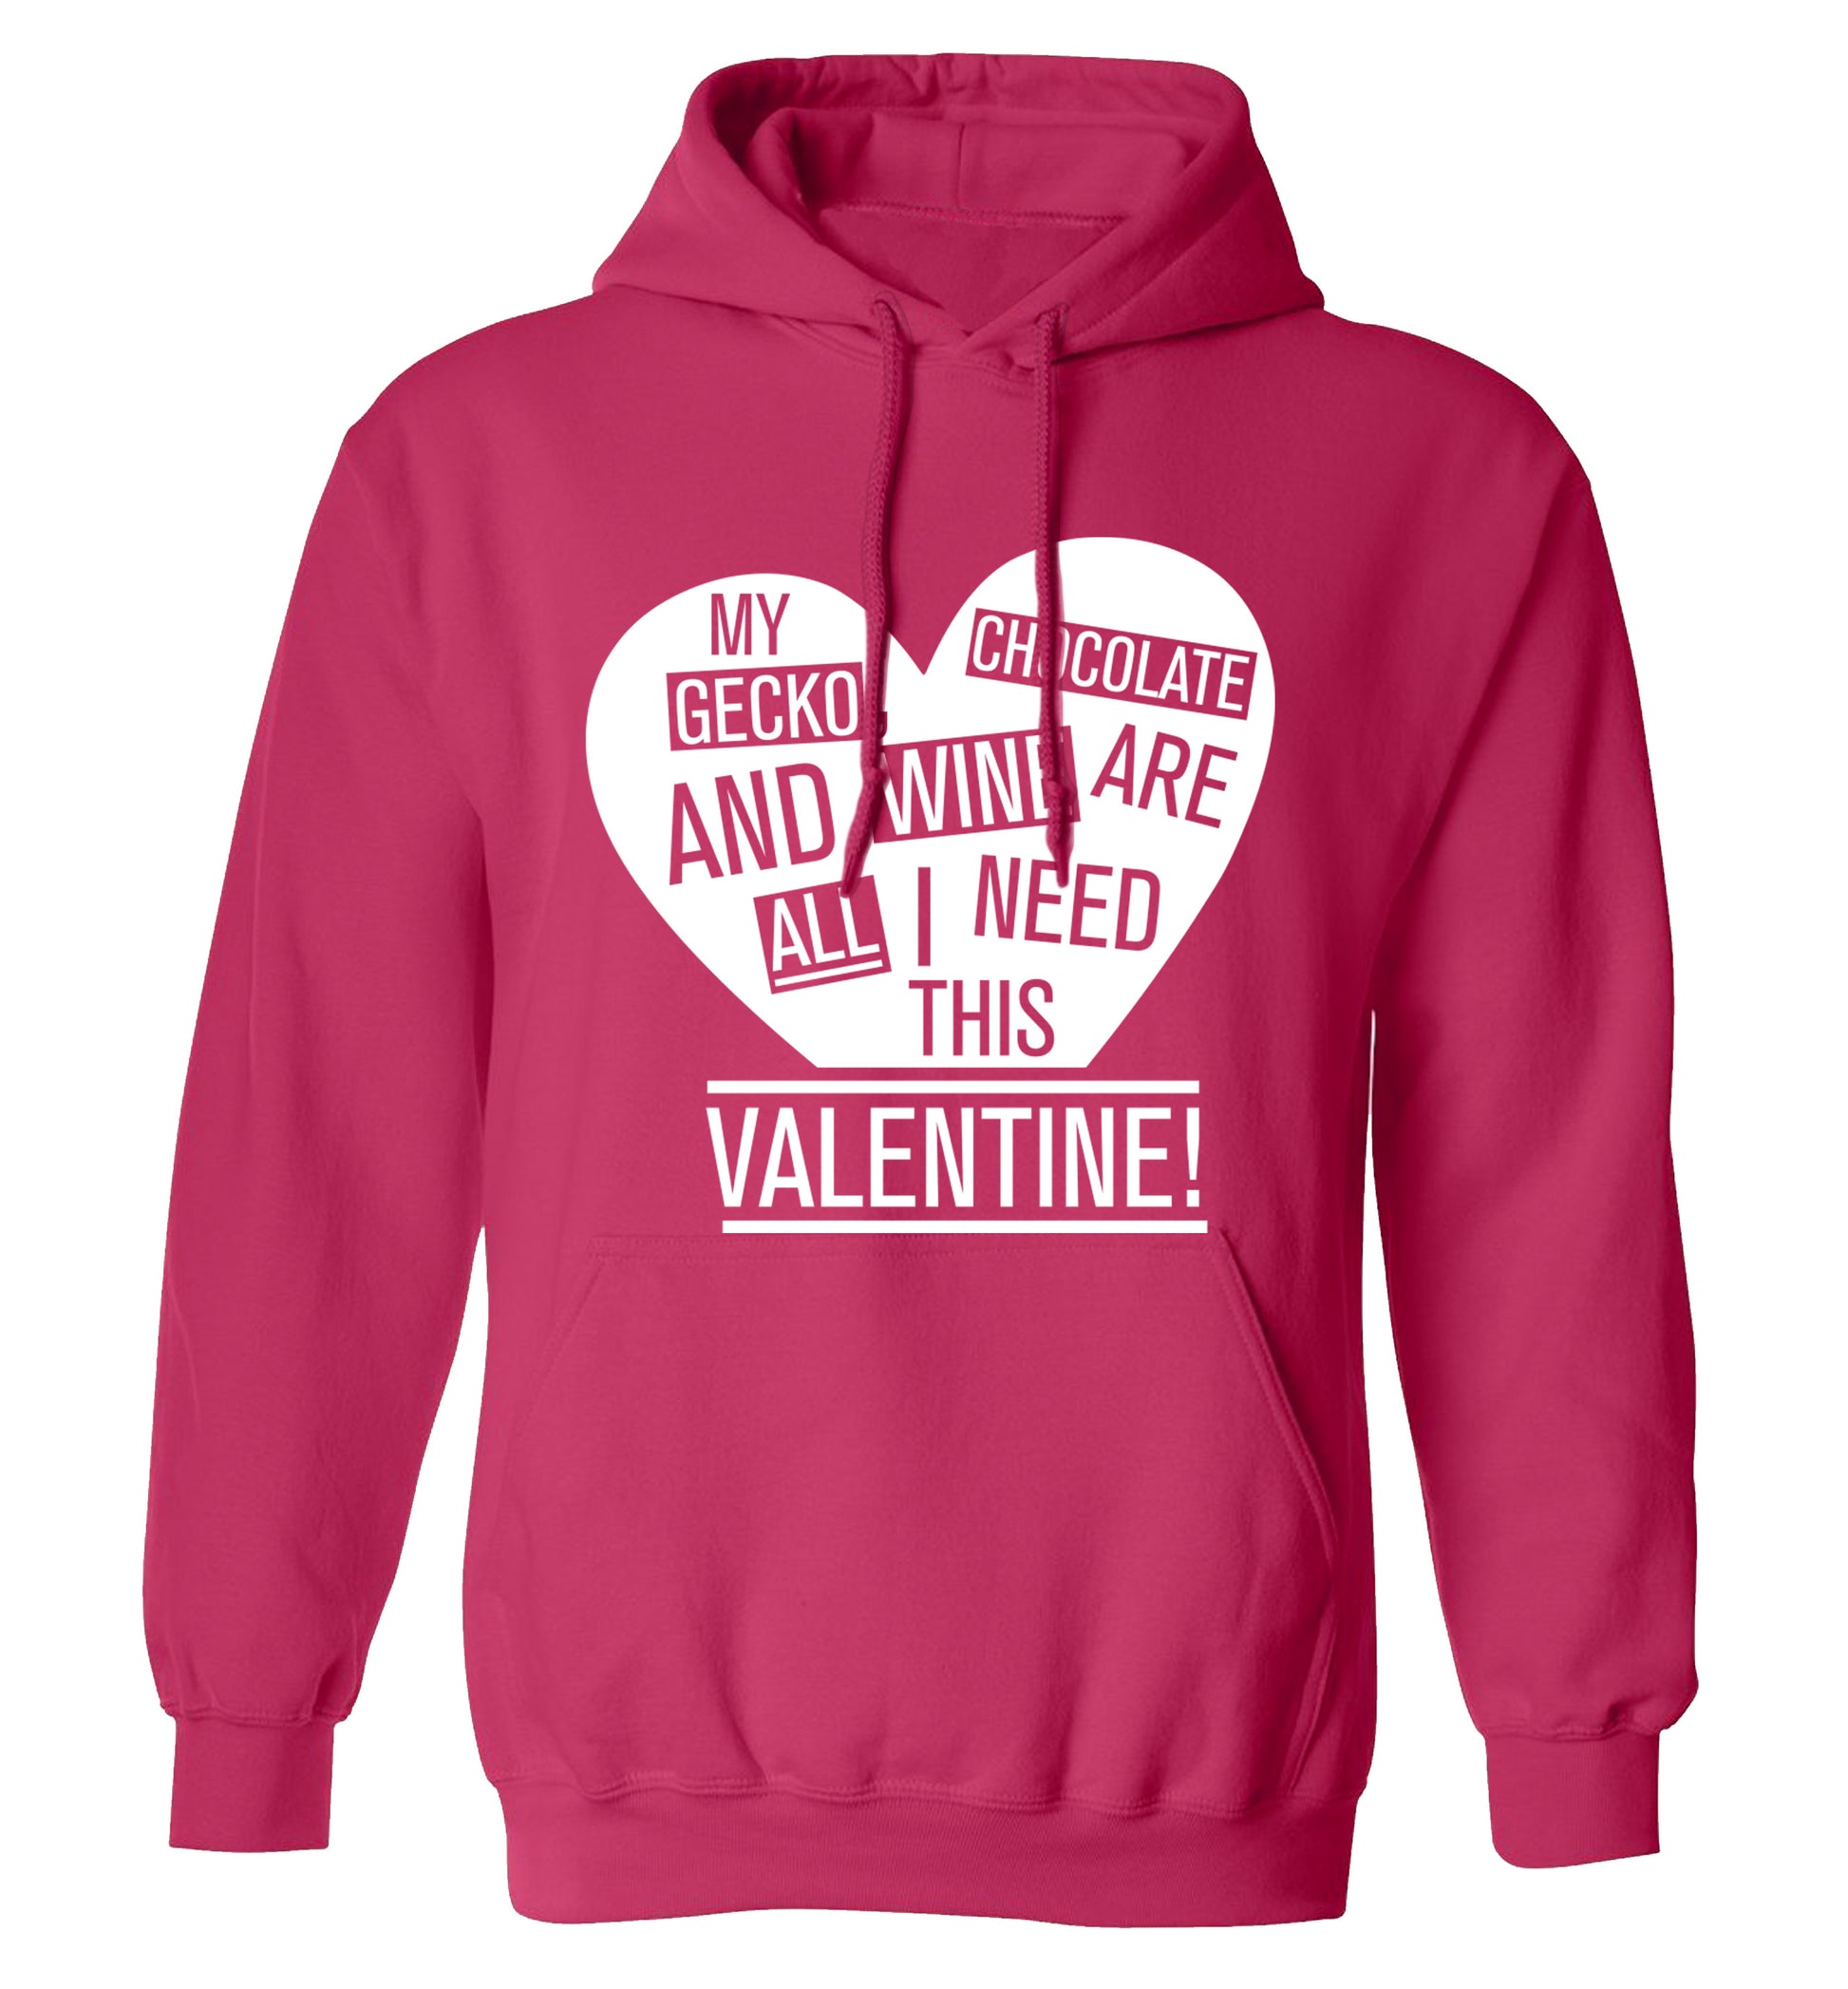 My gecko, chocolate and wine are all I need this valentine! adults unisex pink hoodie 2XL